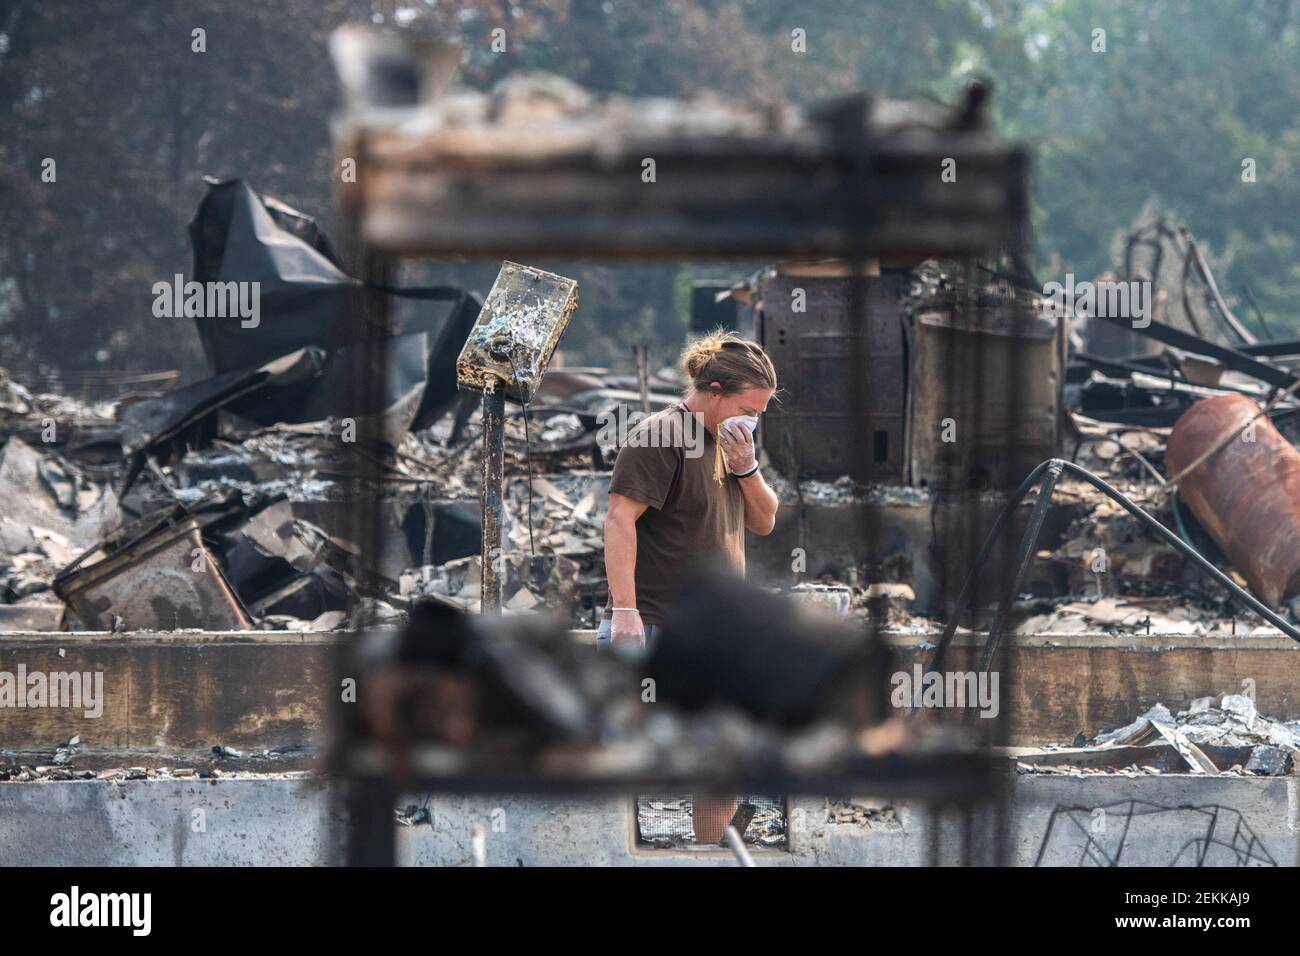 TALENT, ORE - SEPTEMBER 18, 2020: Zach Kuhlow checks the remnants of his house for anything salvagable. His son, who is now 10, was born inside the house. In Talent, about 20 miles north of the California border, homes were charred beyond recognition. Across the western US, at least 87 wildfires are burning, according to the National Interagency Fire Center. They've torched more than 4.7 million acres -- more than six times the area of Rhode Island. Credit: Chris Tuite/imageSPACE/Sipa USA Stock Photo